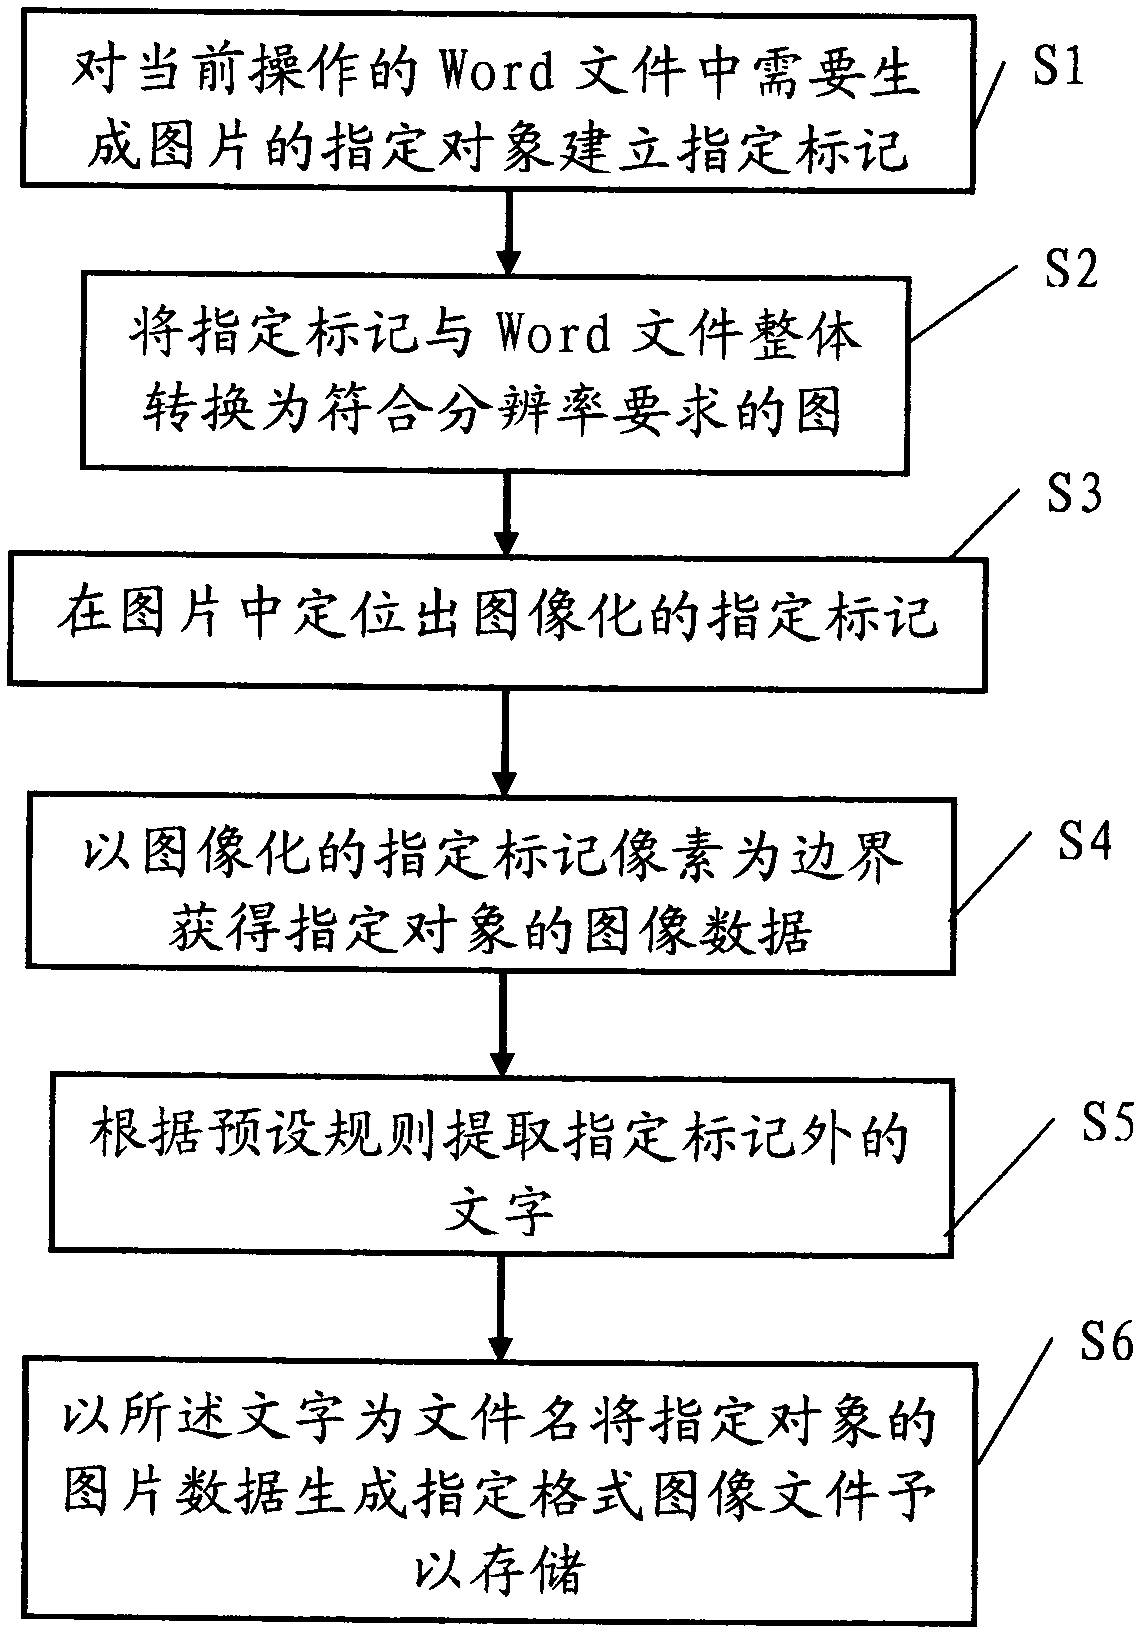 Word document image generating method and system